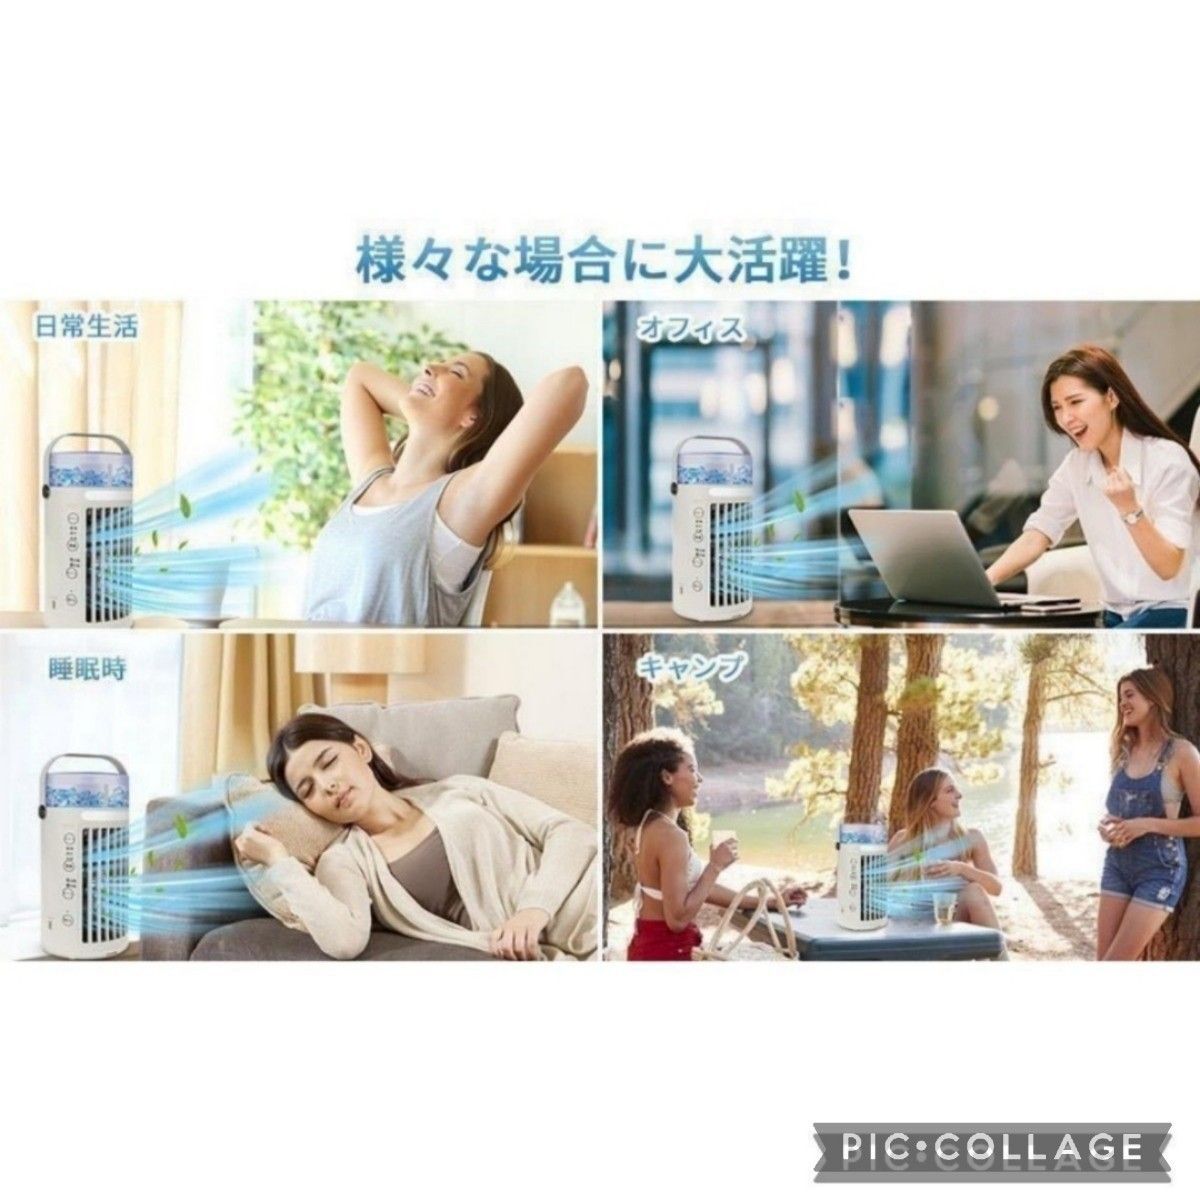 . hot,. middle . measures! new goods free shipping! cold air fan desk cold manner machine Mini air conditioner USB supply of electricity type cold manner electric fan desk electric fan spot cooler small size 